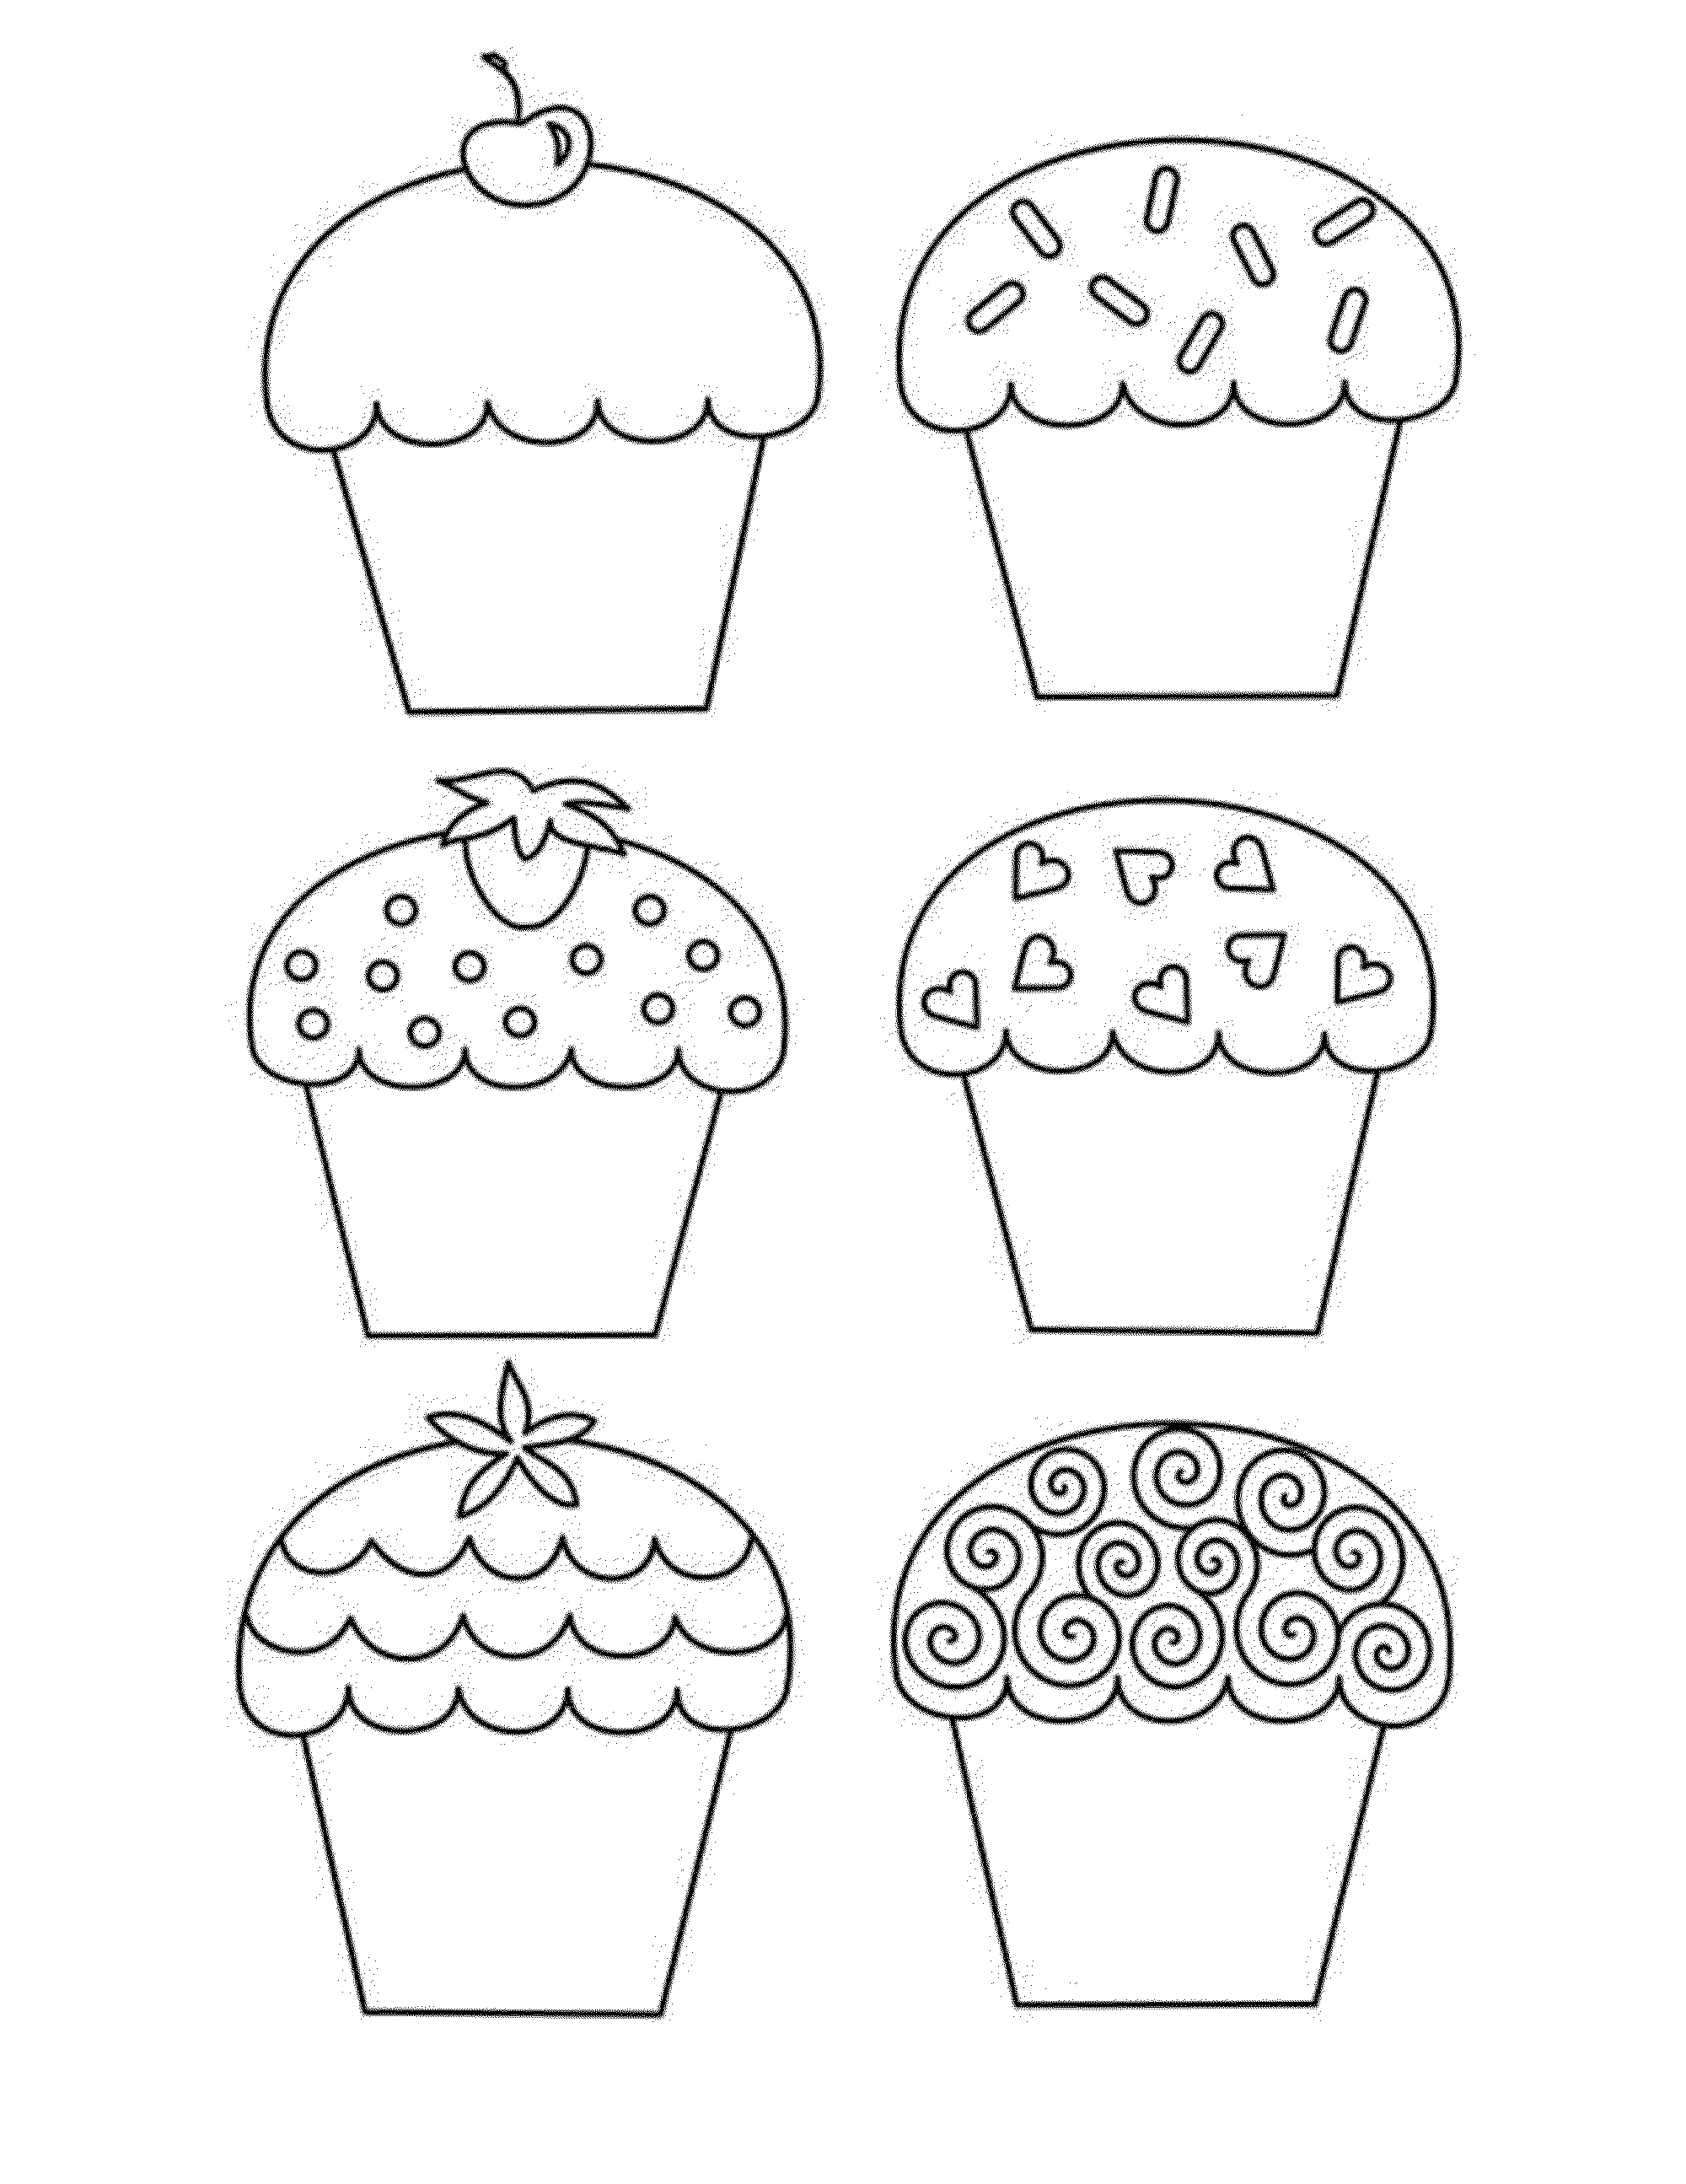 9 Best Images of Large Cupcake Printable Birthday Cupcake Template